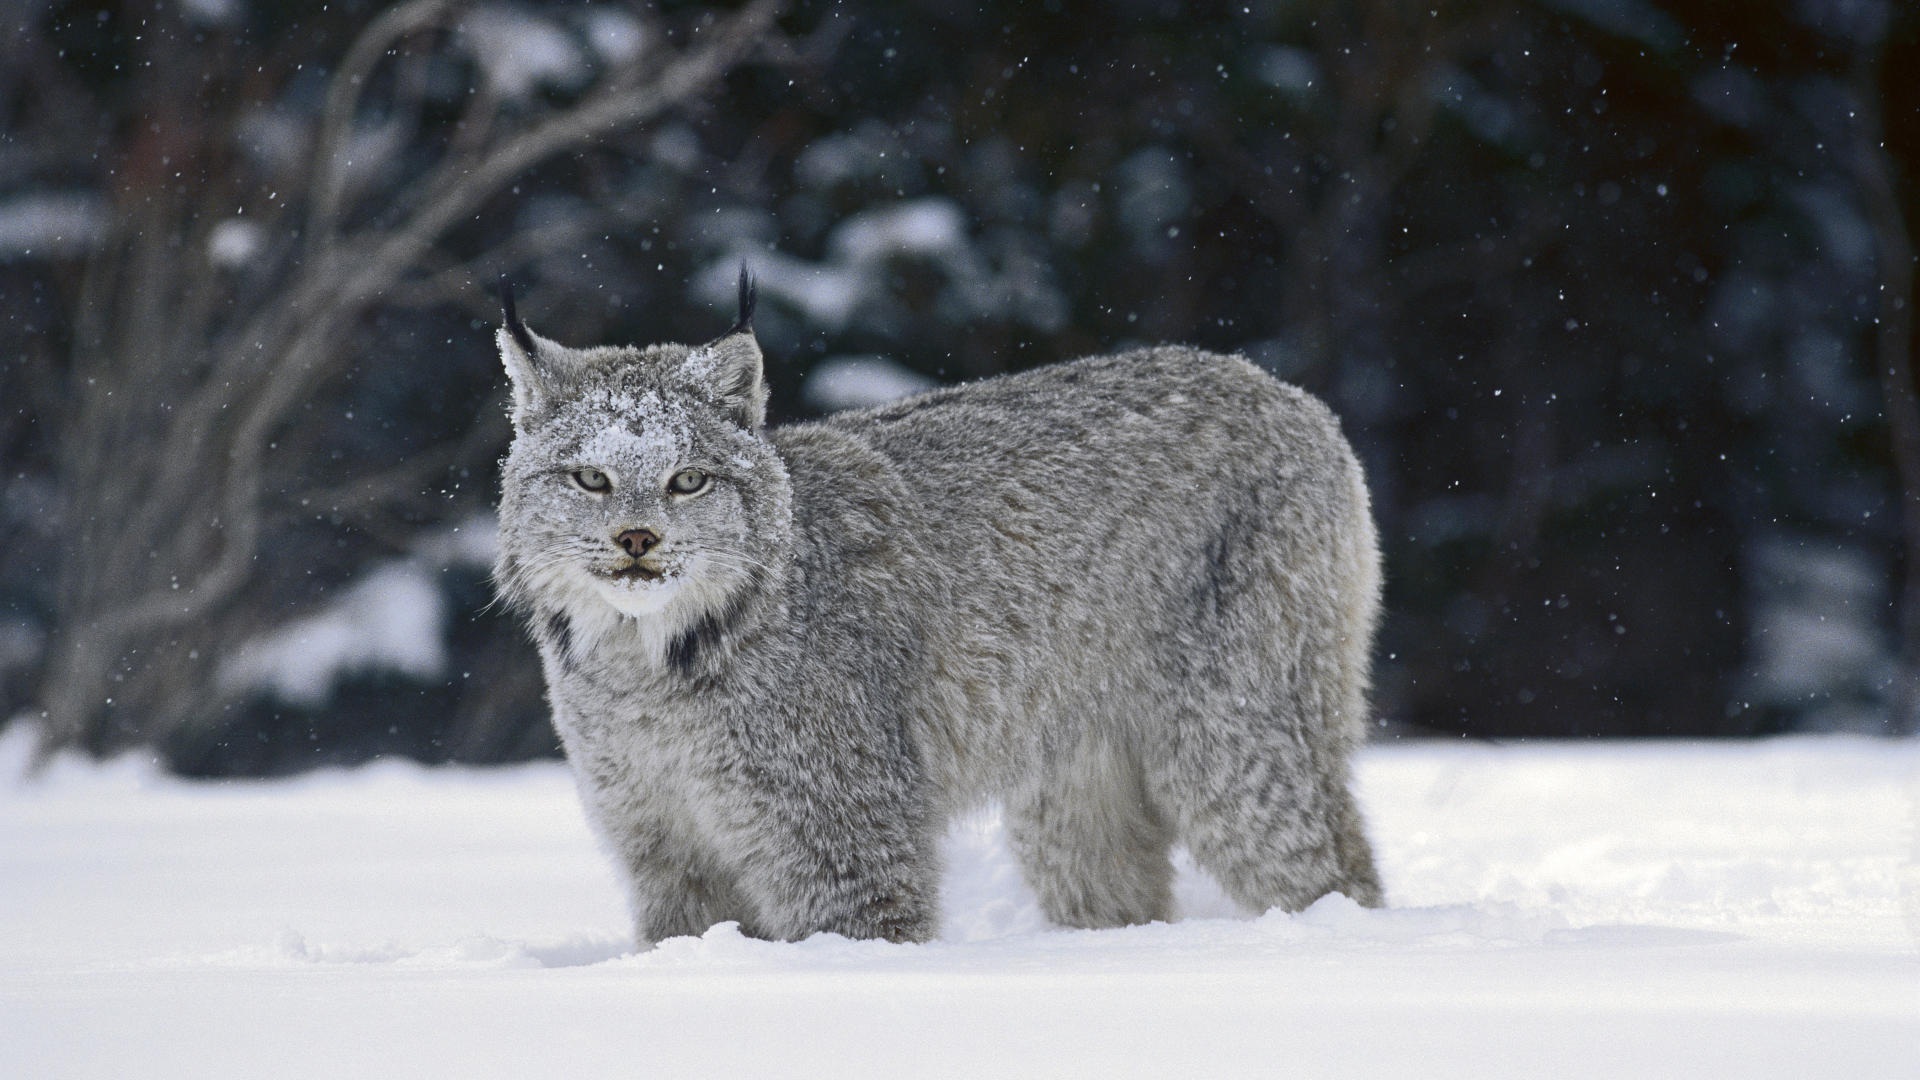 View and Download Canadian Lynx Wallpaper ...